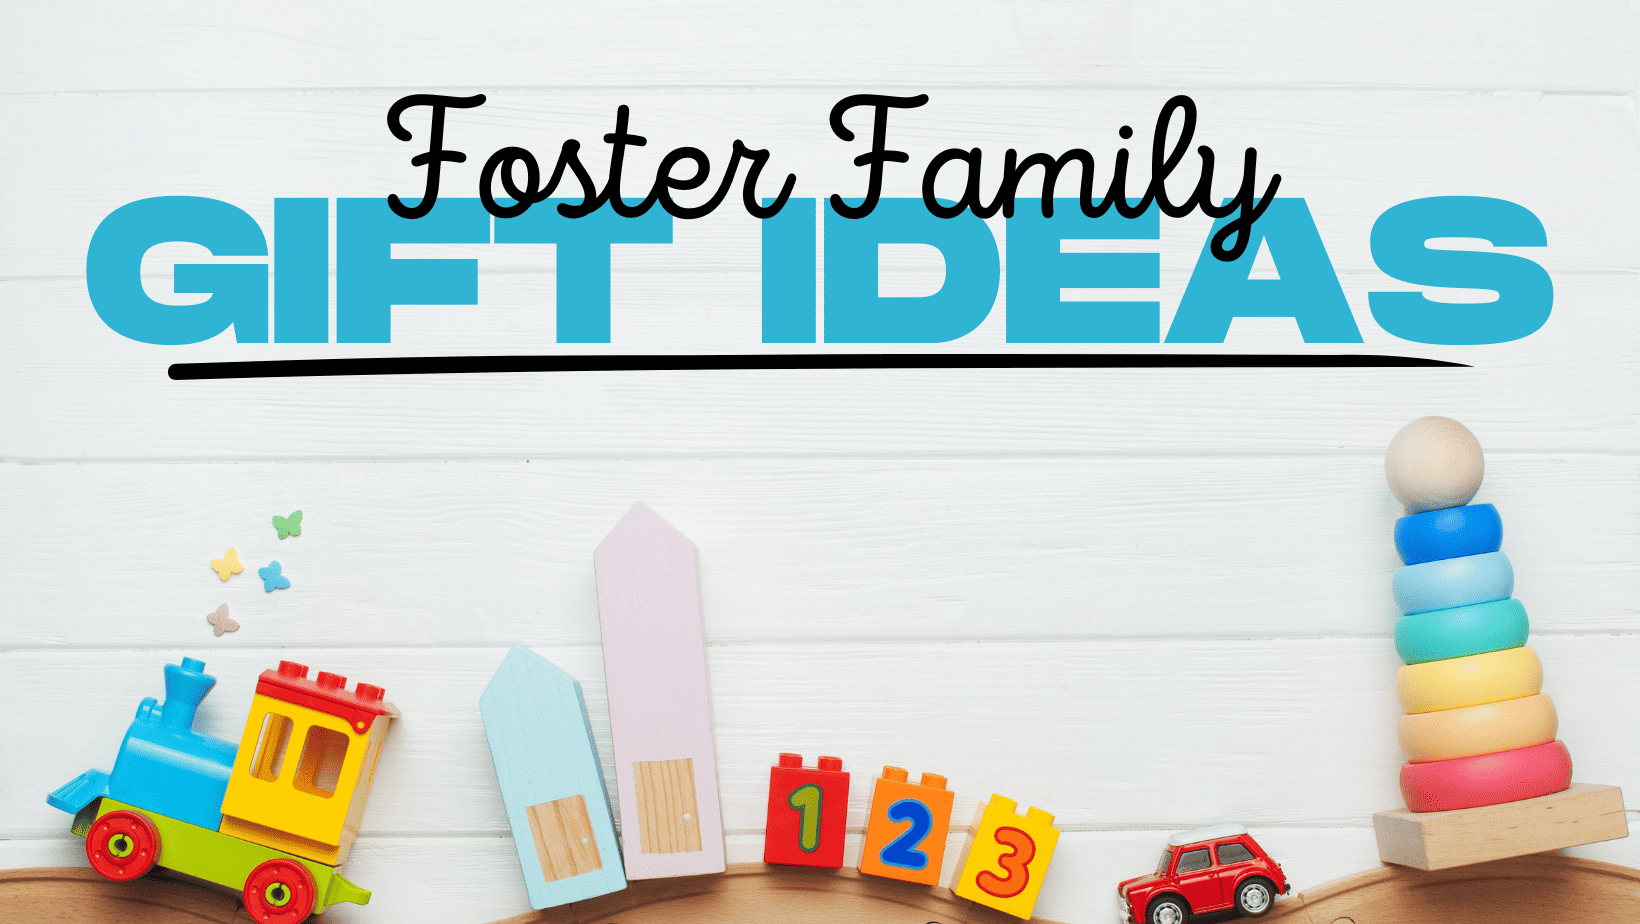 Foster Family Gift Ideas image of toys